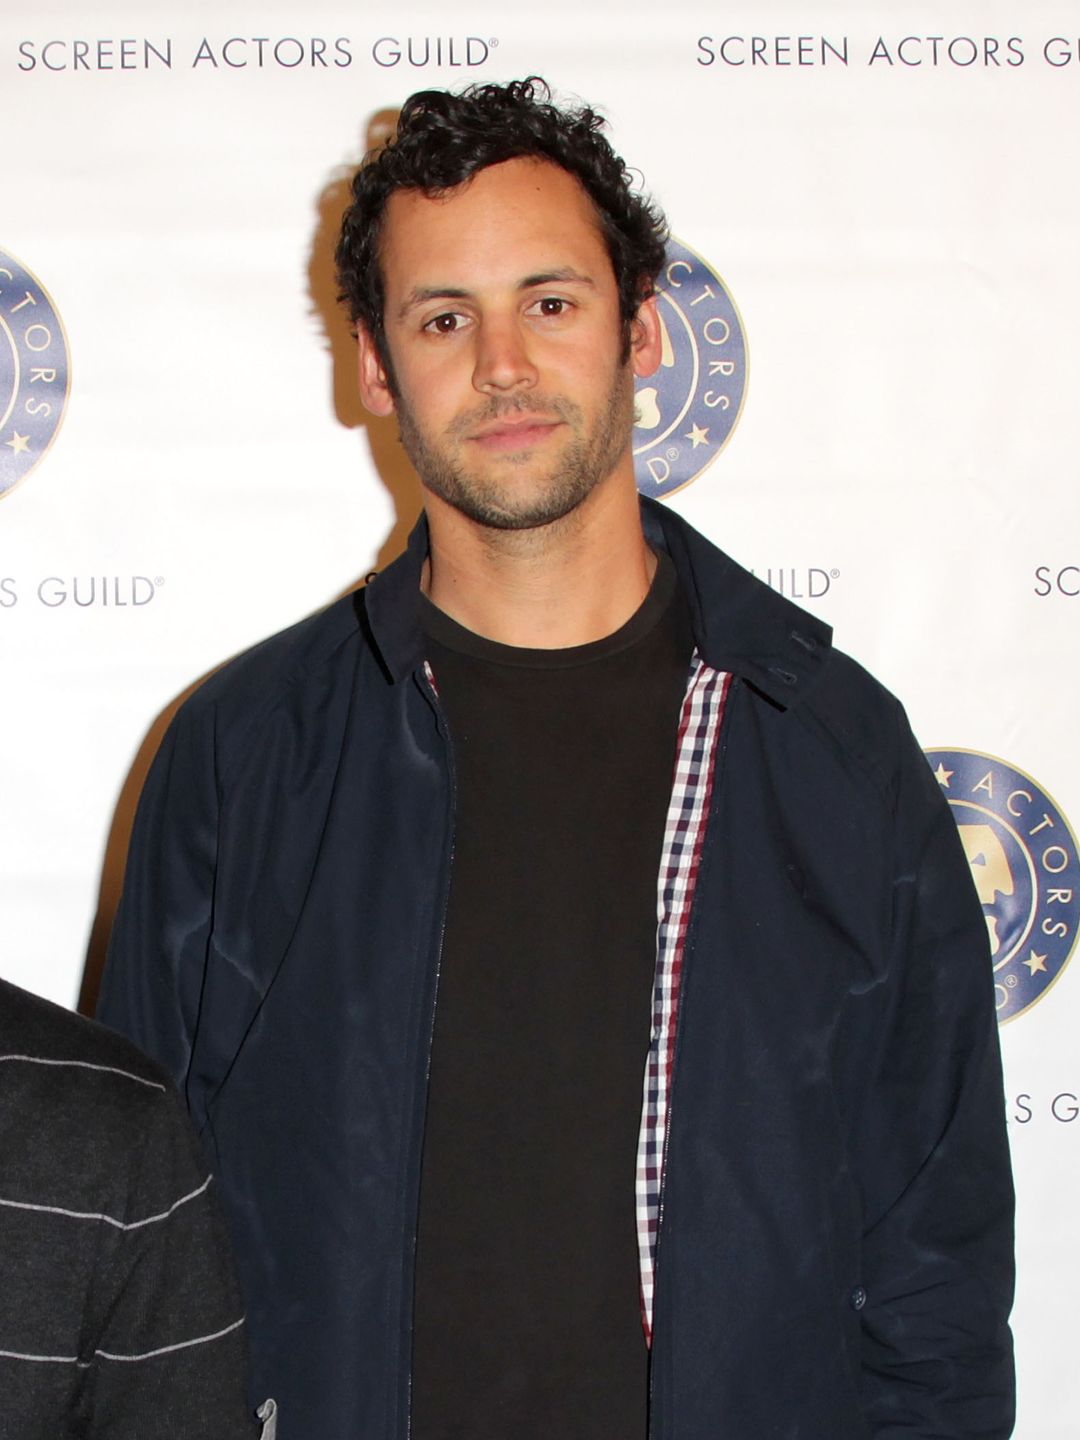 Avi Rothman at the Screen Actors Guild & SAGIndie Breakthrough Filmmakers Party during AFI FEST 2010 presented by Audi held at the Hollywood Roosevelt Hotel on November 9, 2010 in Hollywood, California